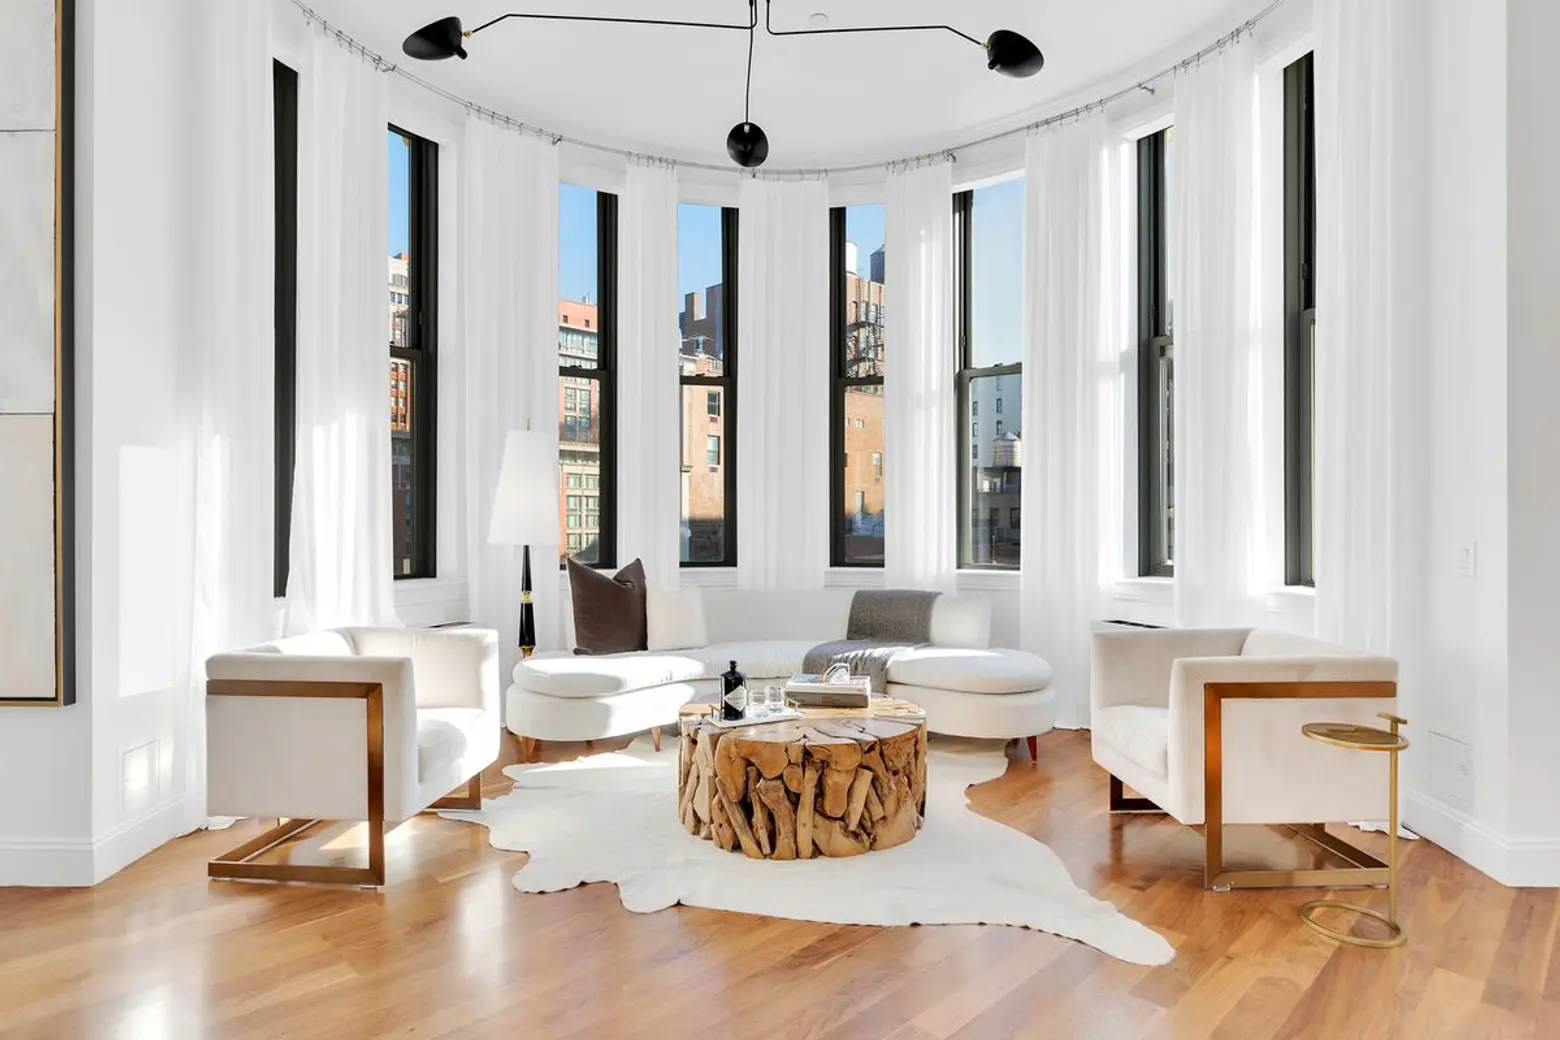 Window-wrapped turrets offer three-way views in this $6M Chelsea aerie